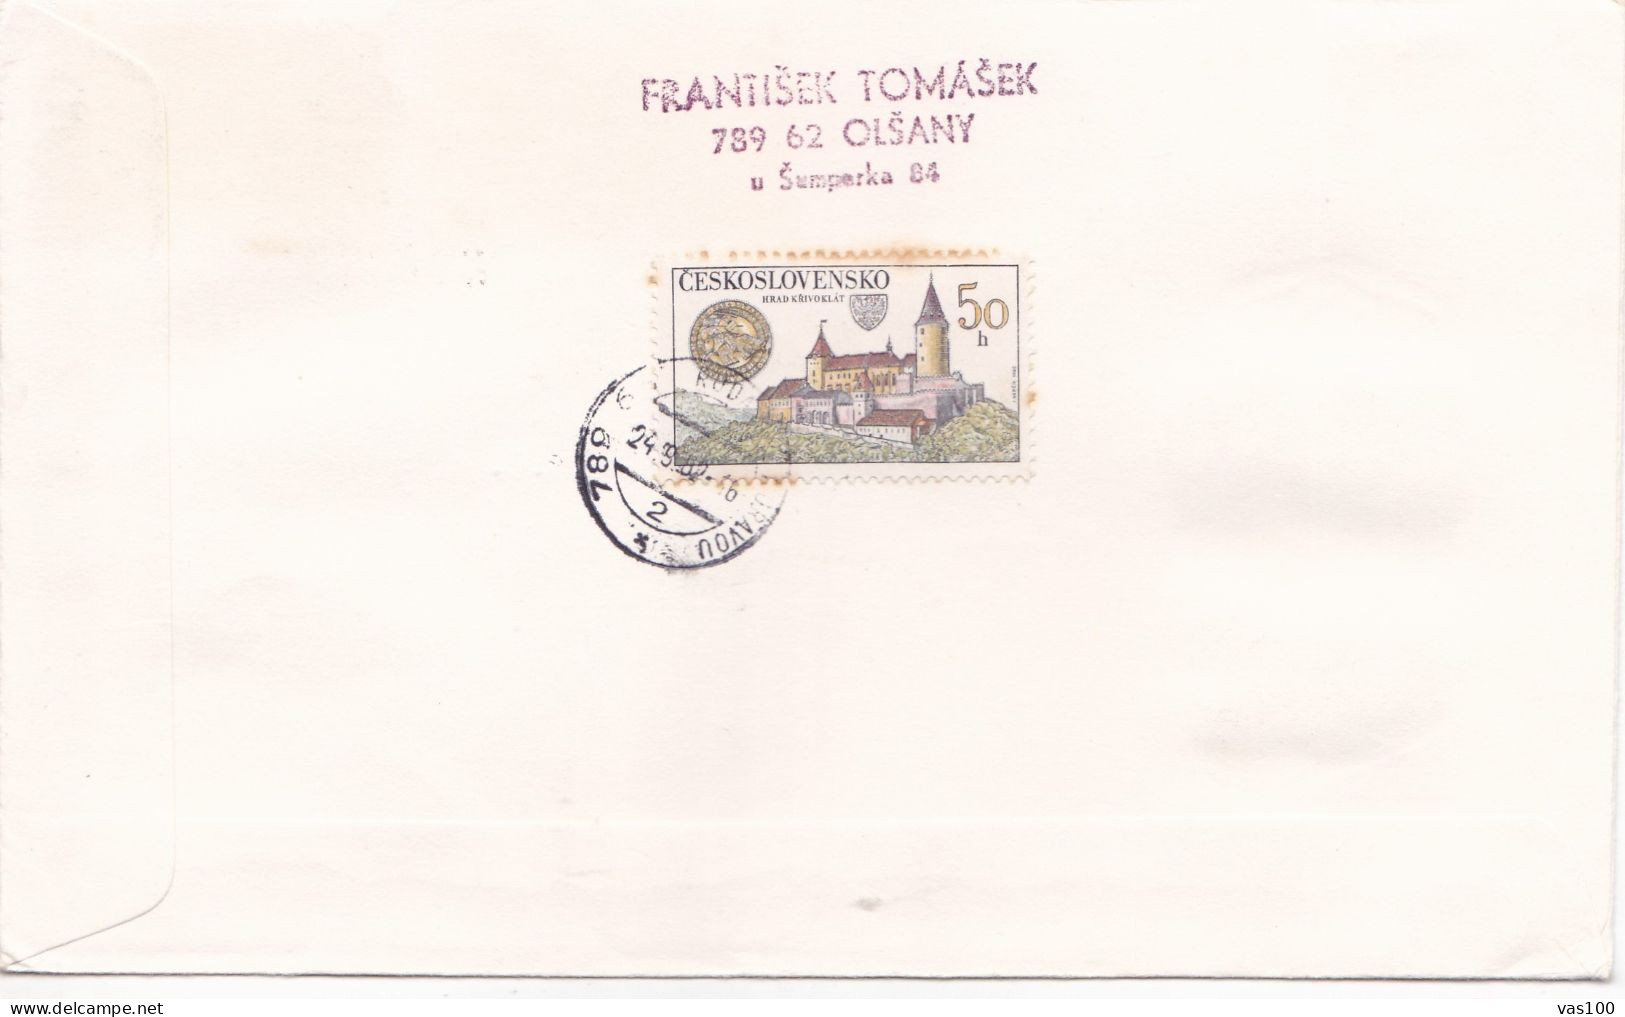 ARHITECTURE 2 COVERS FDC  CIRCULATED 1982 Tchécoslovaquie - Storia Postale